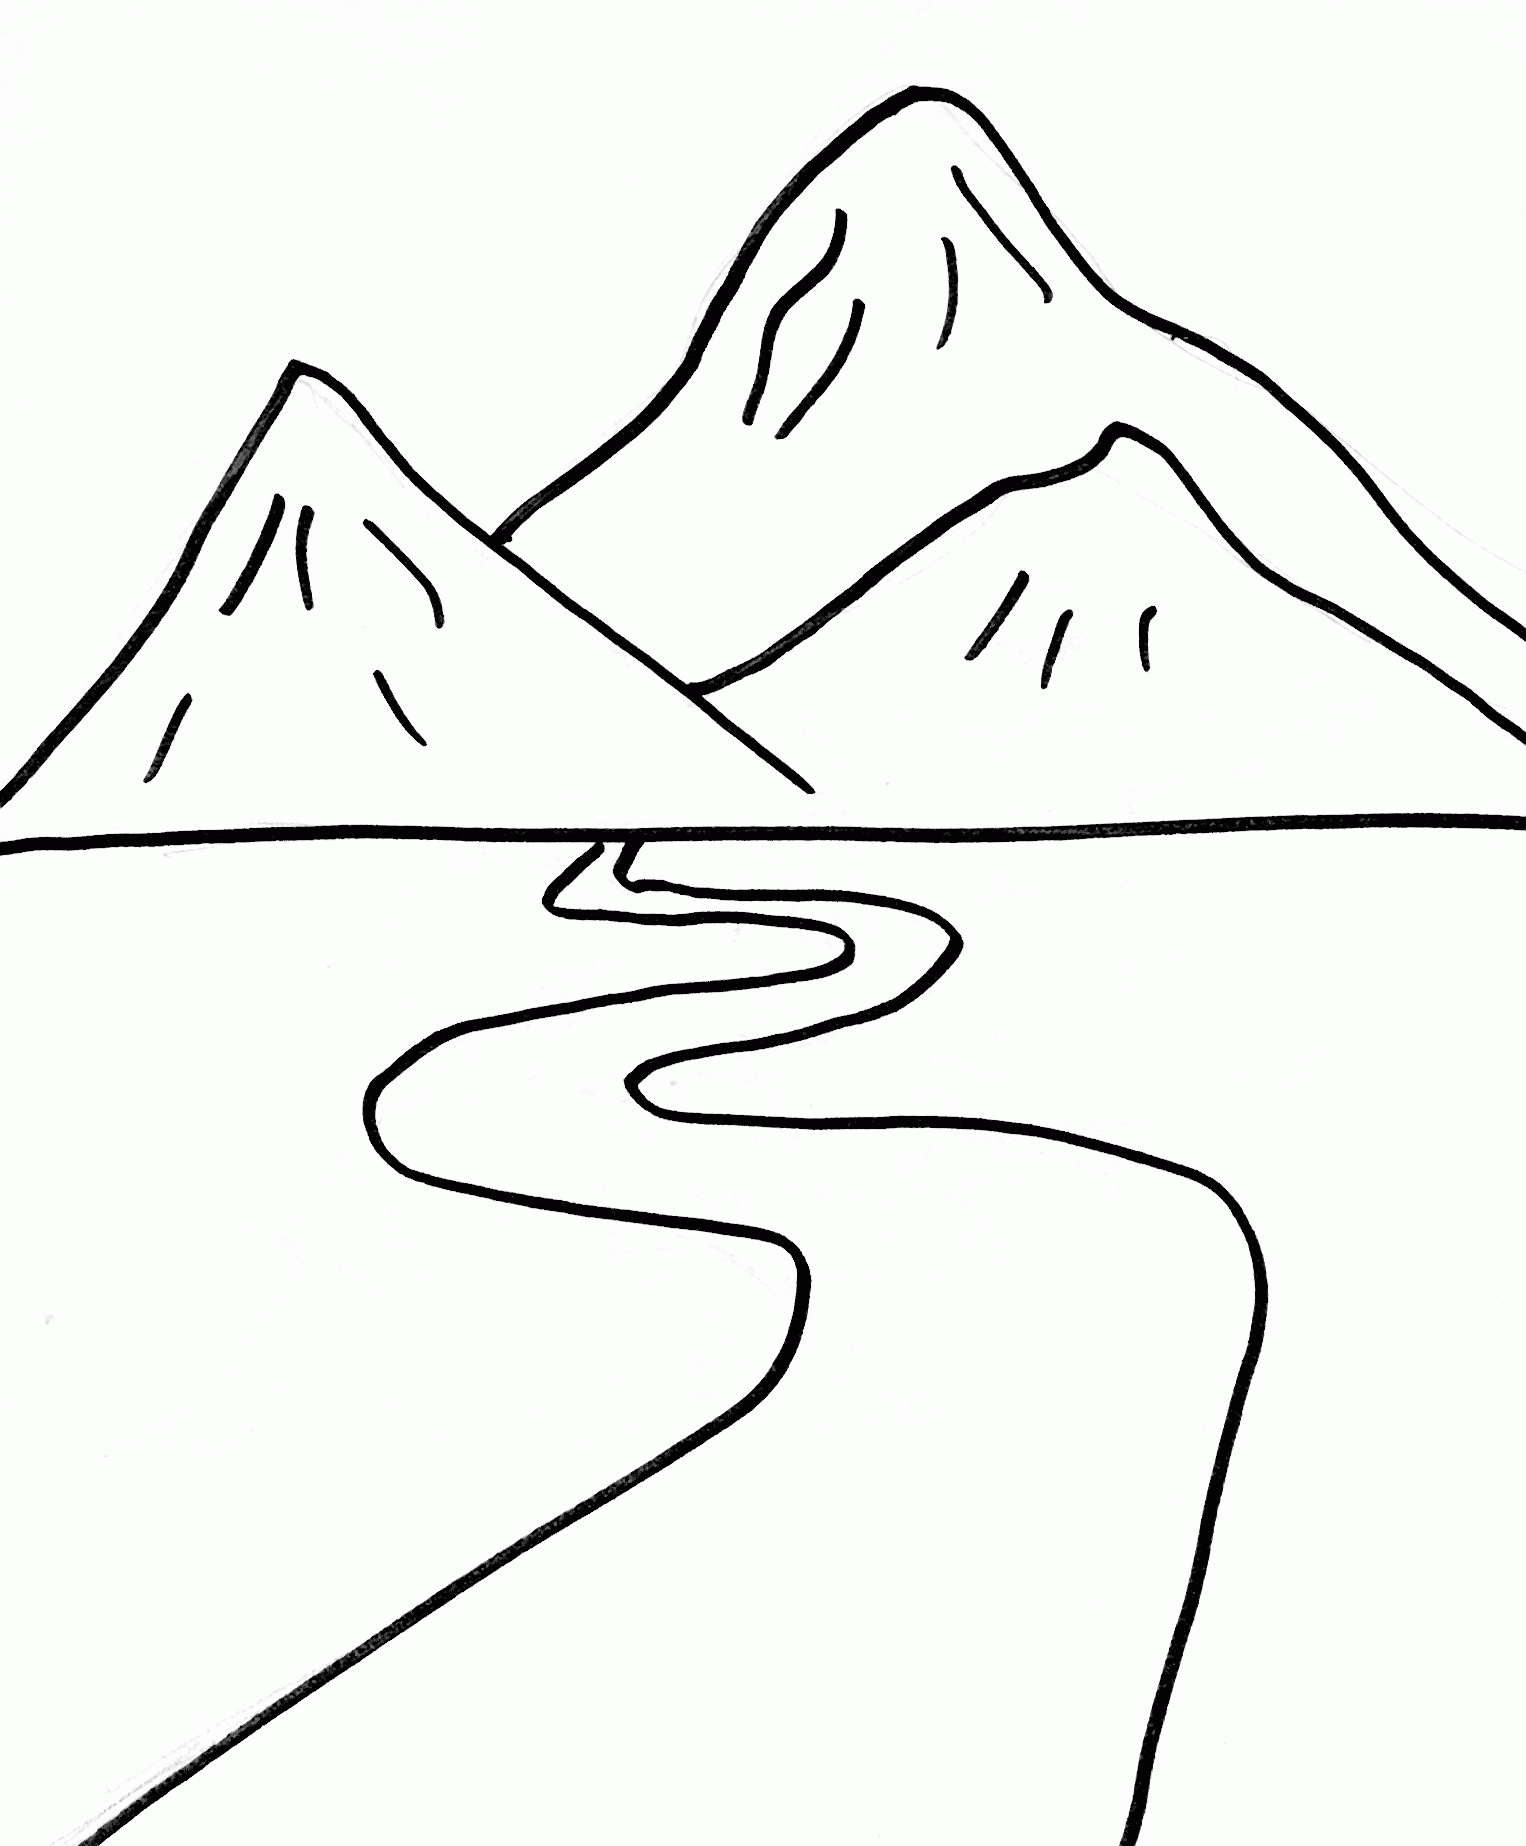 coloring pages of mountains mountain pictures mountains coloring page of pages mountains coloring 